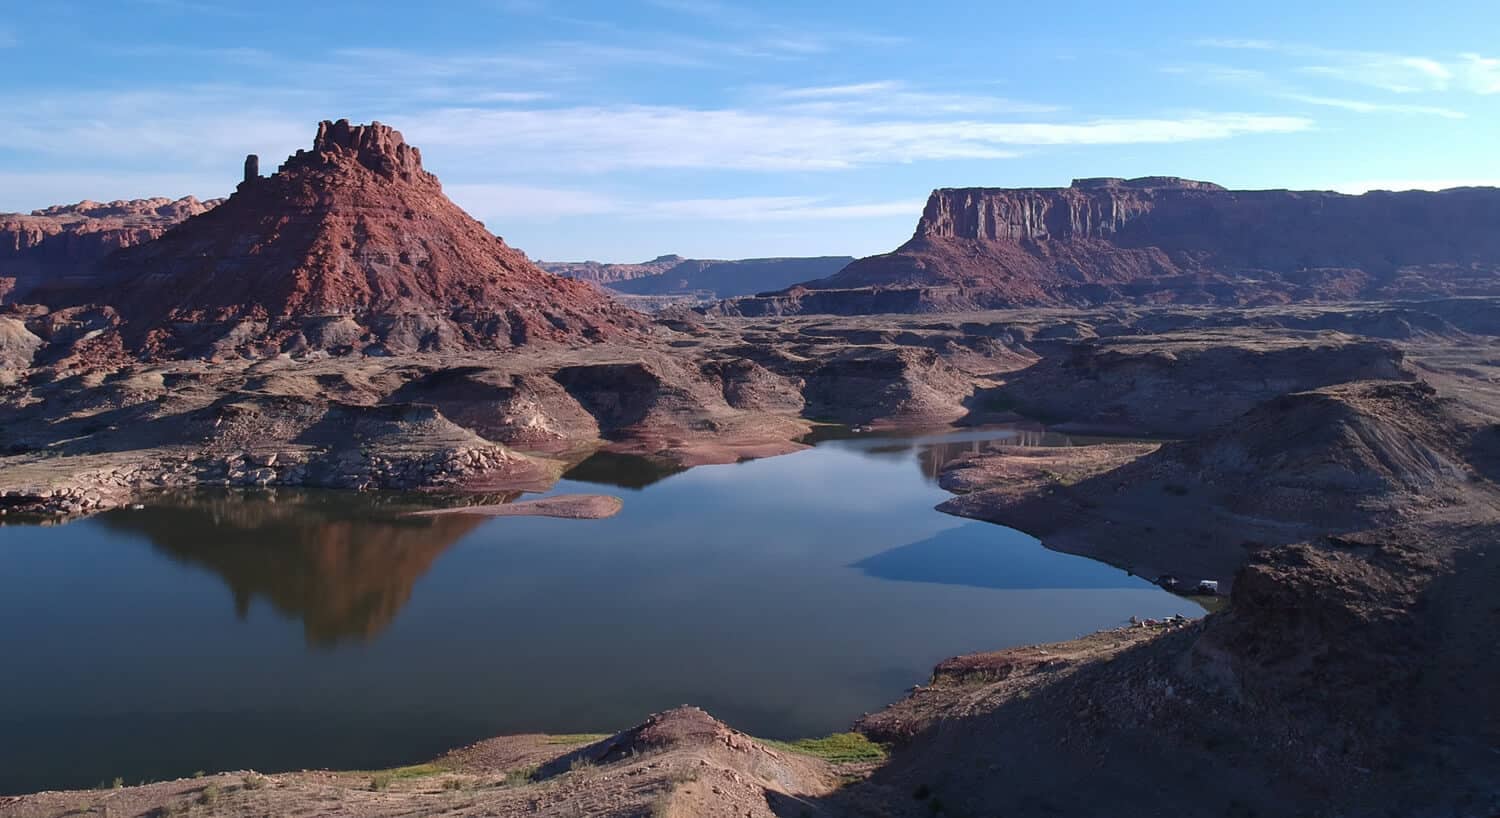 Red rock formations and mounds of dirt reflecting off water in front under blue sky with fluffy white clouds